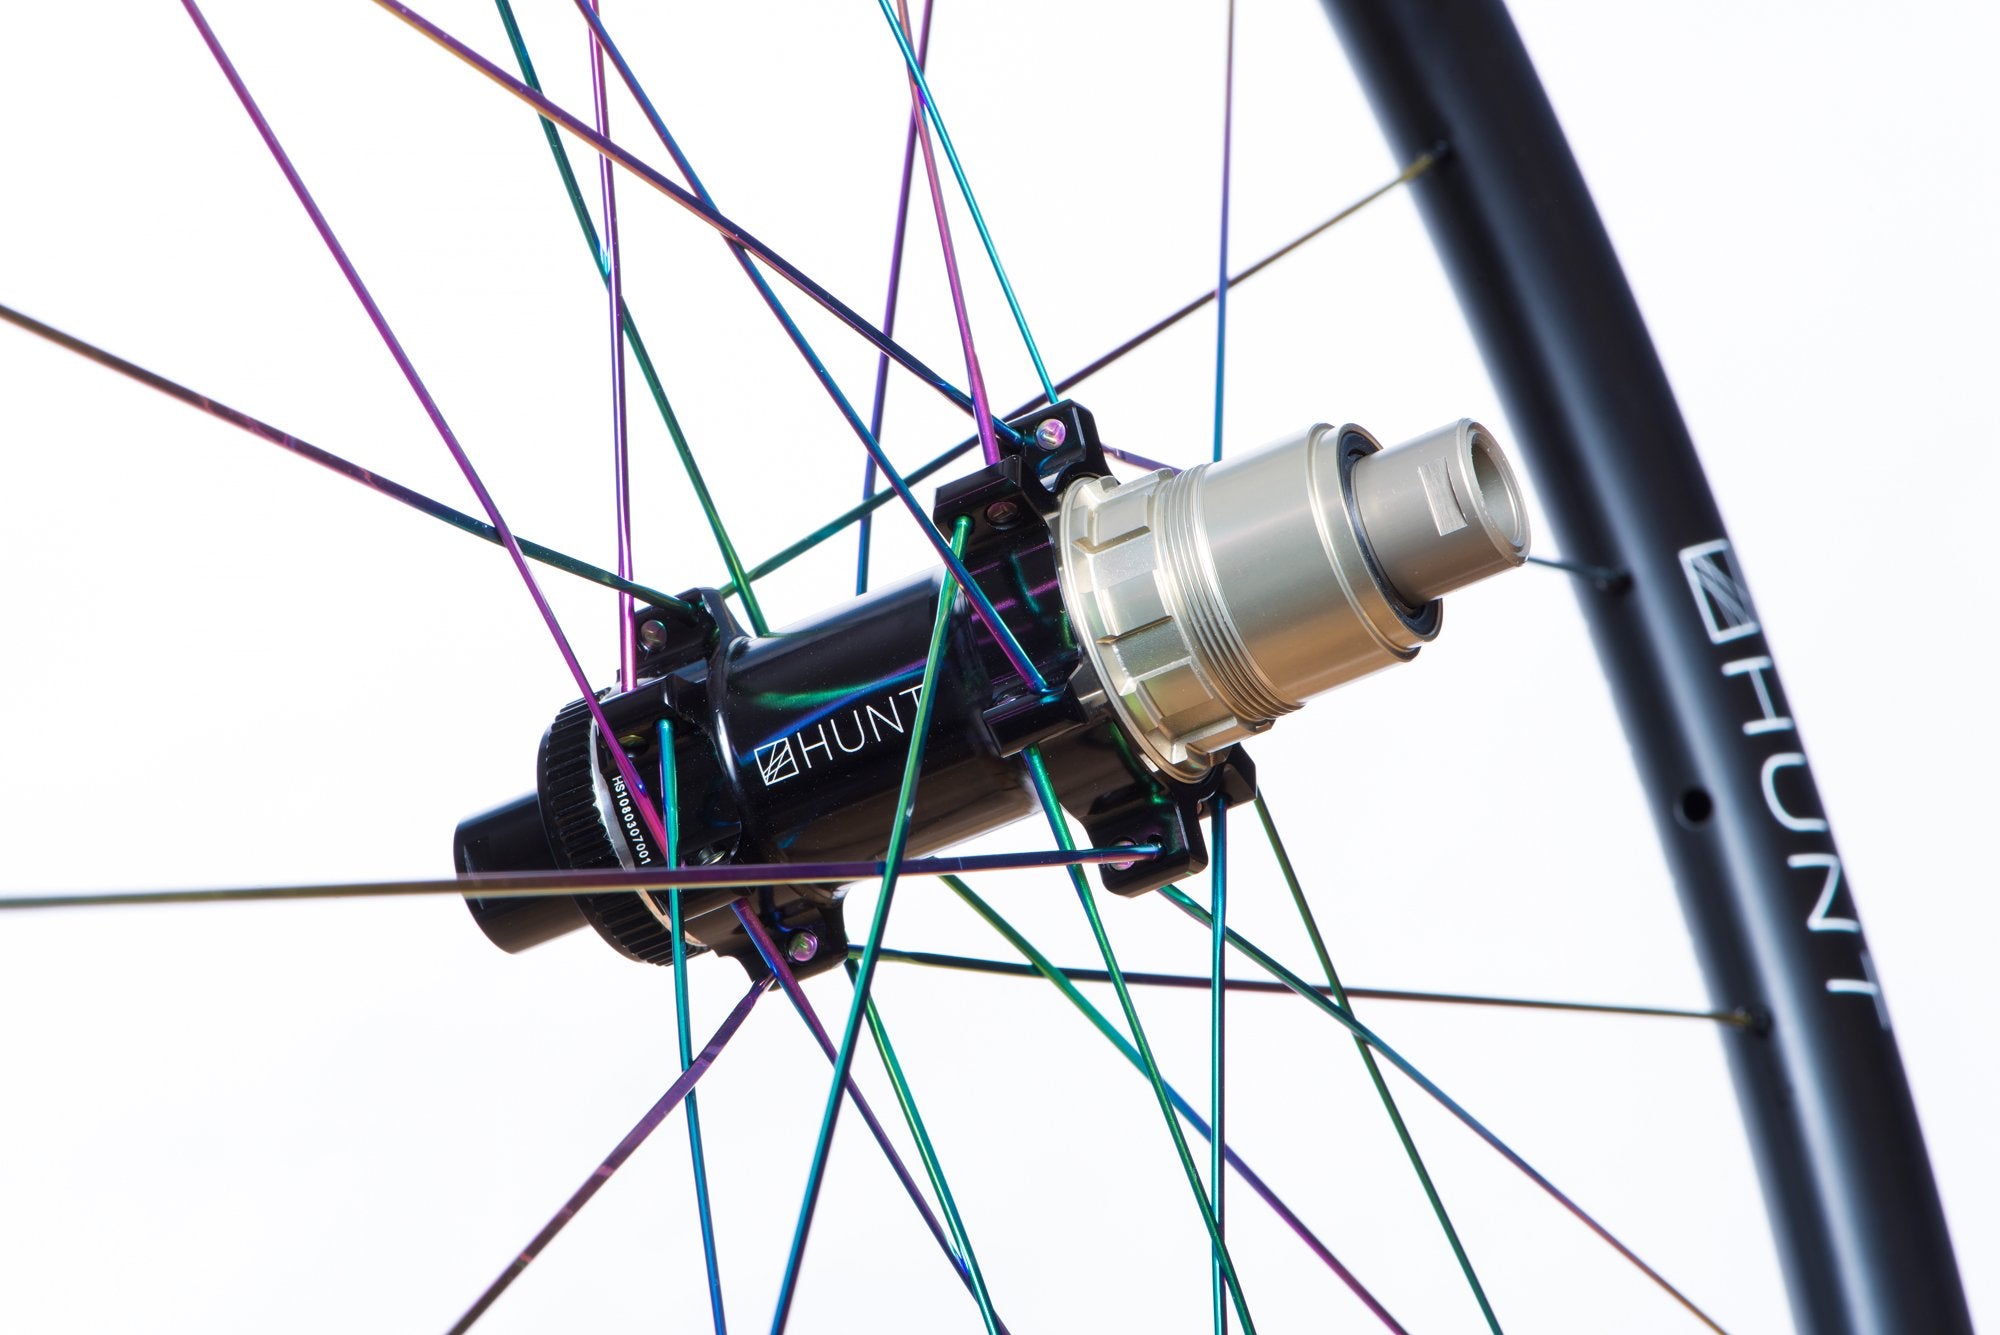 <h1>Freehub Body</h1><i>Durability is a theme for Hunt as time and money you spend fixing is time and money you cannot spend riding or upgrading your bikes. As a result all our freehub bodies have Steel Spline Insert re-enforcements to provide excellent durability against cassette sprocket damage often seen on standard alloy freehub bodies.</i>